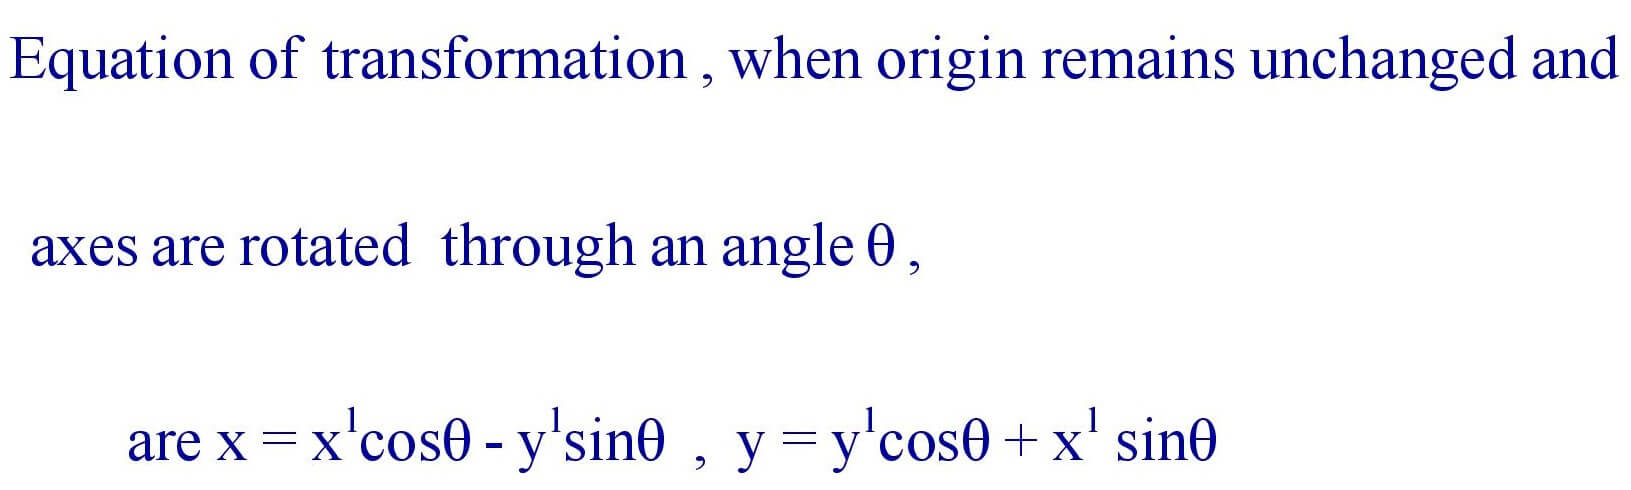 Equation of transformation , when origin remains unchanged and axes are rotated through an angle θ.